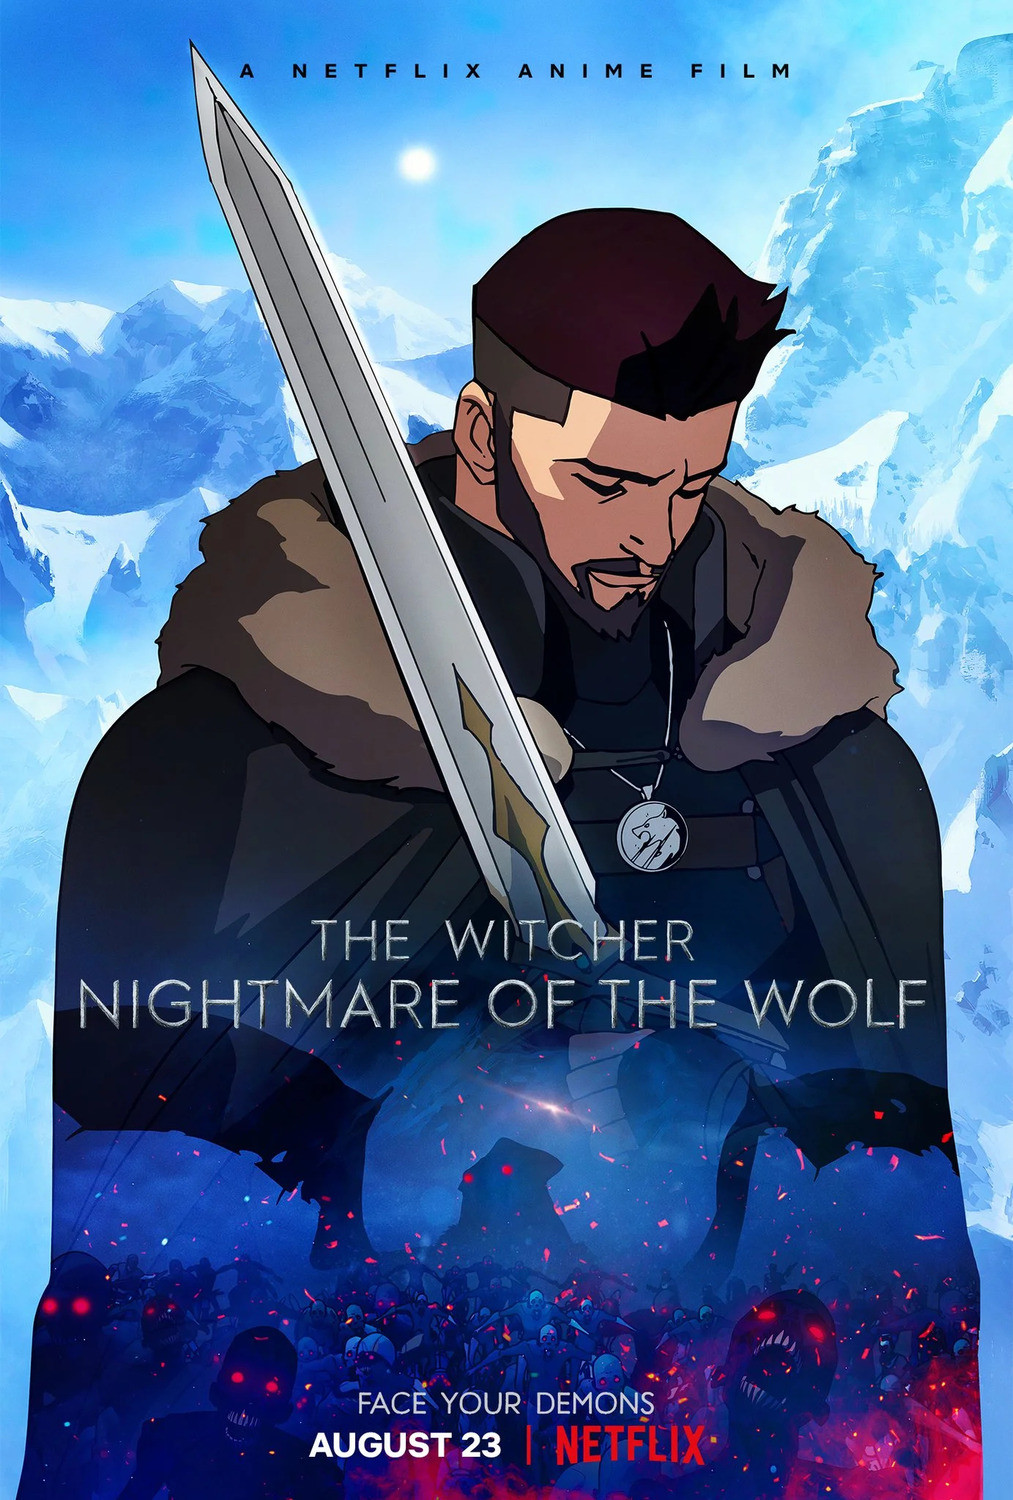 The Witcher: Nightmare of the Wolf Reviews